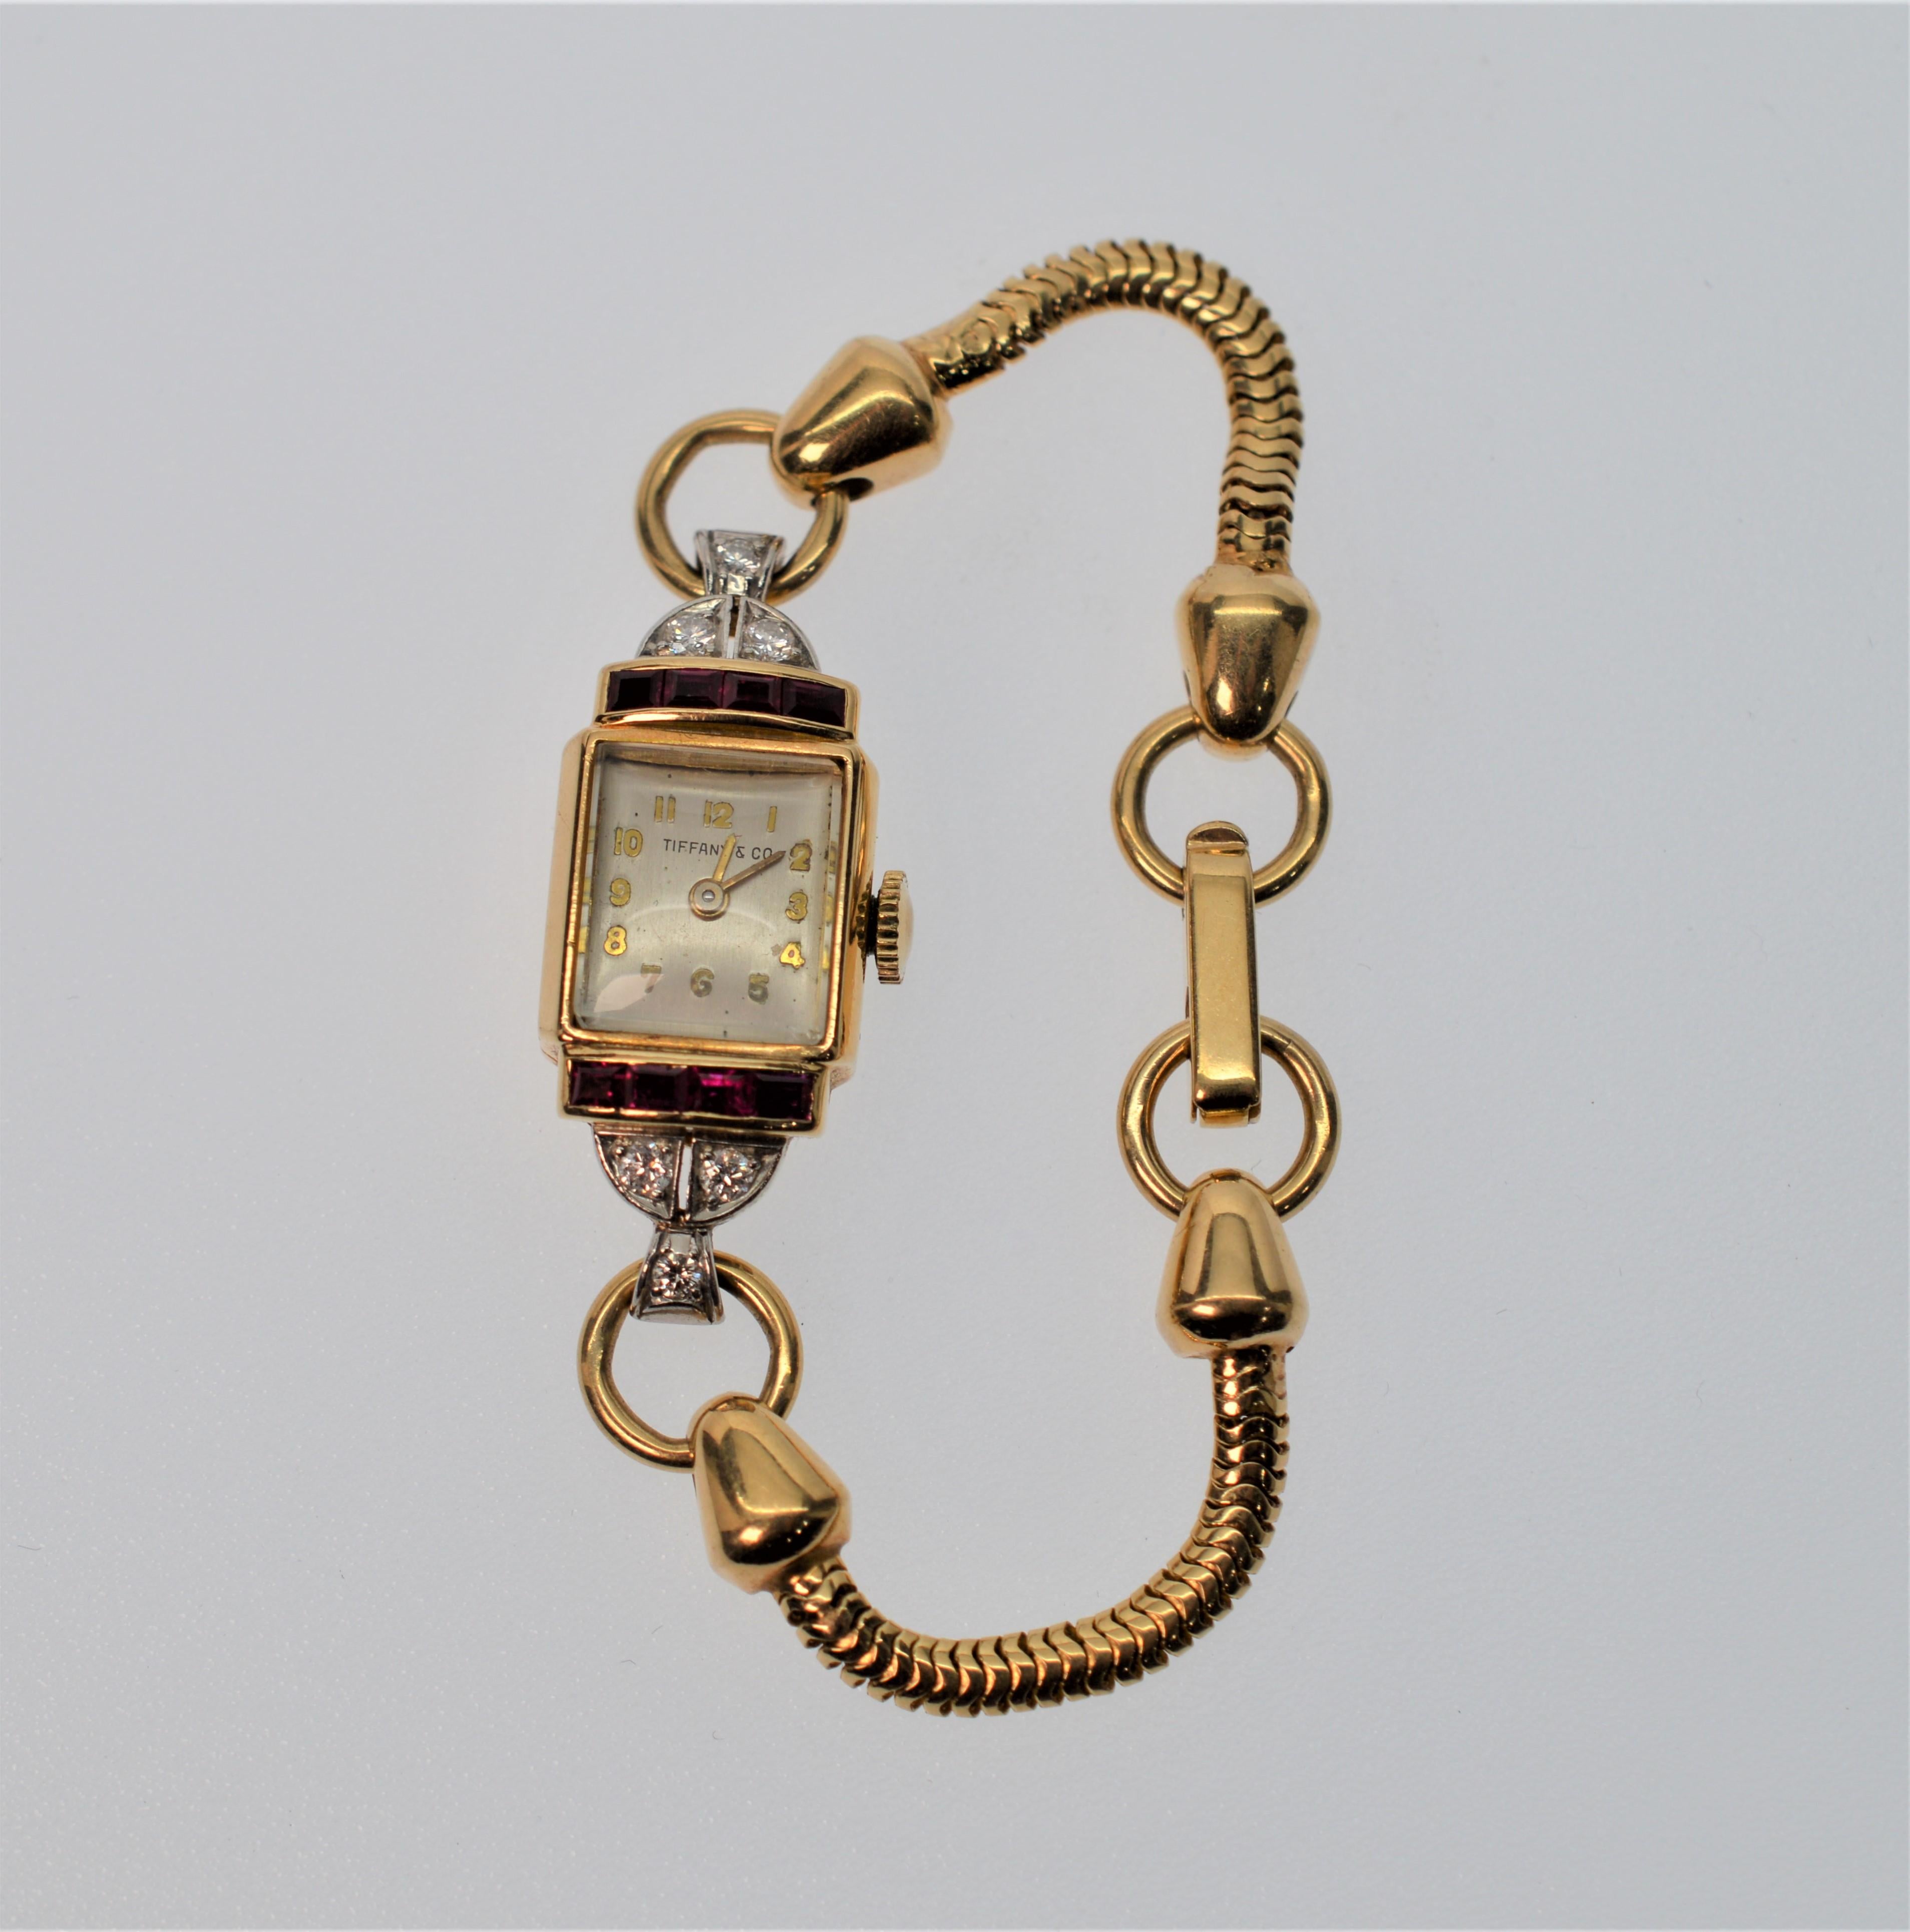 Tiffany & Co. Ladies Ruby & Diamond 14k Yellow Gold Watch Bracelet. In working order, this 17 jewel watch has a movement by Crestwood Watch Co.
The watch head measures approximately 1-1/4 x 1 inch and is inlaid with eight Rubies (.40 cts. total